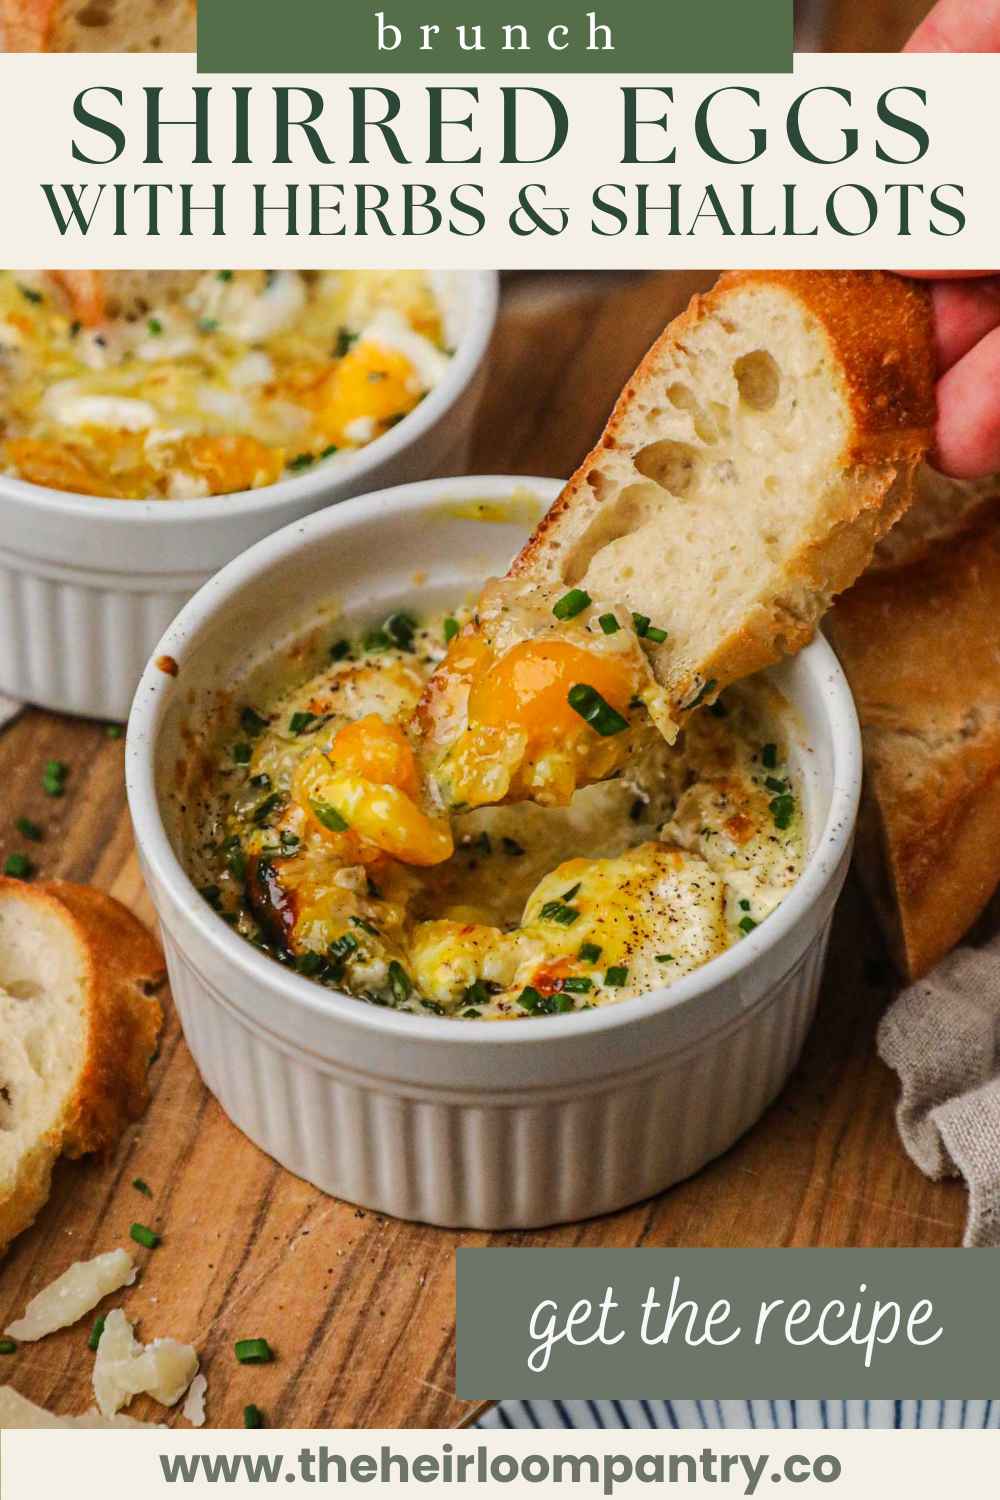 Shirred eggs with herbs and shallots Pinterest pin.